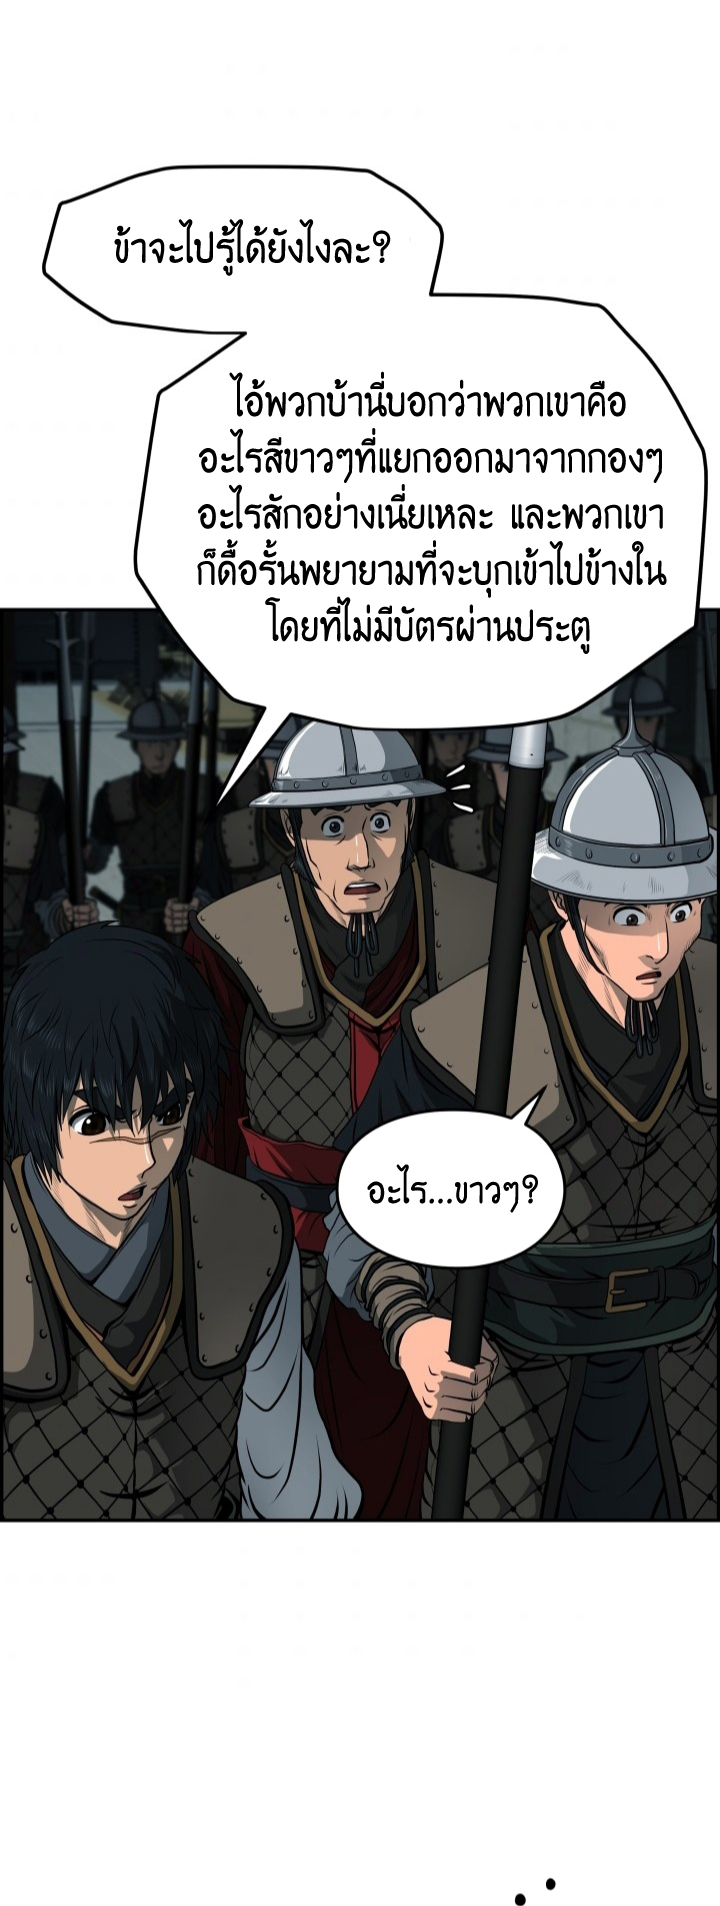 Blade of Wind and Thunder 25 (33)